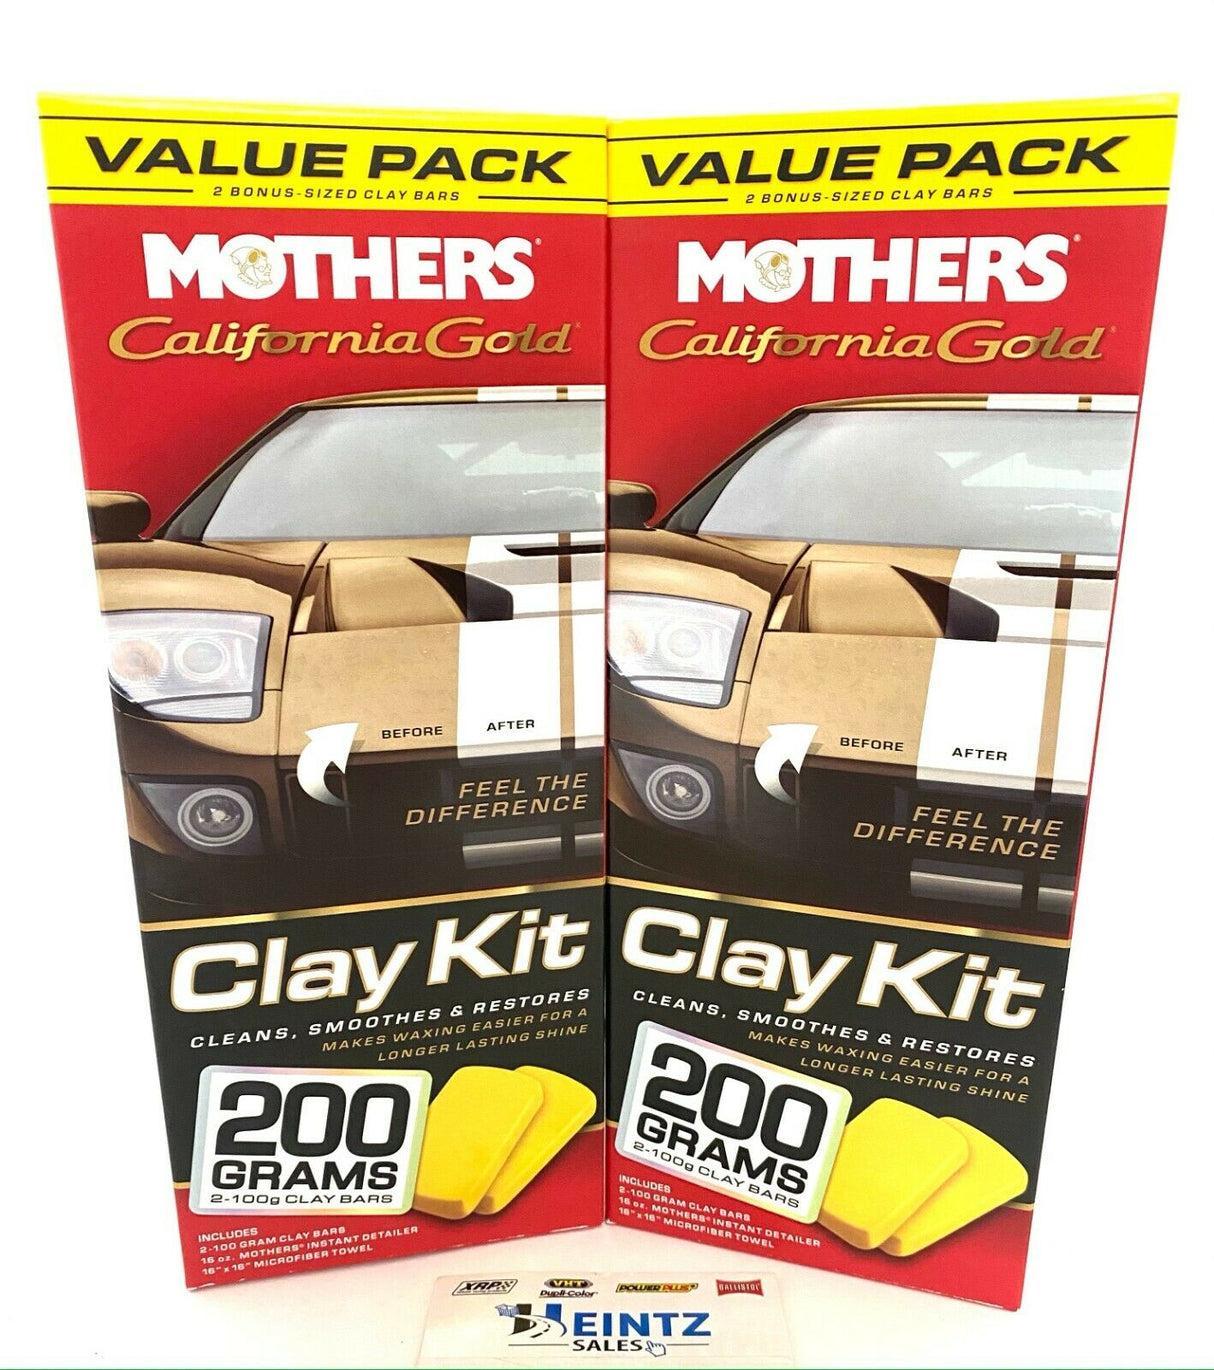 MOTHERS 07243 California Gold Deluxe Clay Bar Kit